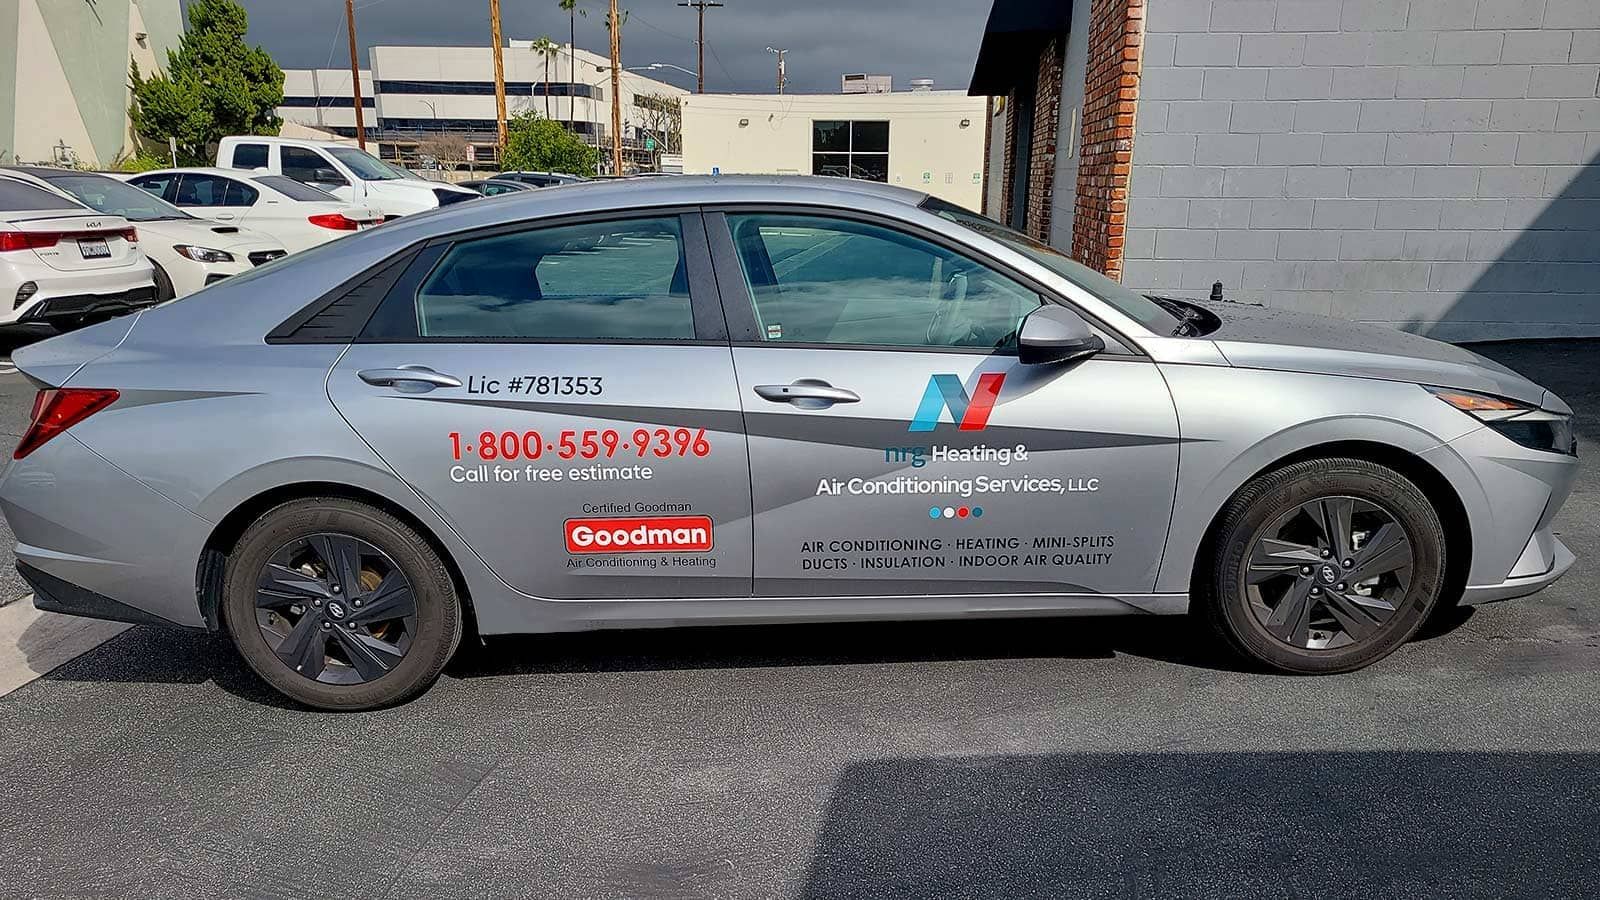 NRG Heating & Air Conditioning, LLC car wraps for the doors